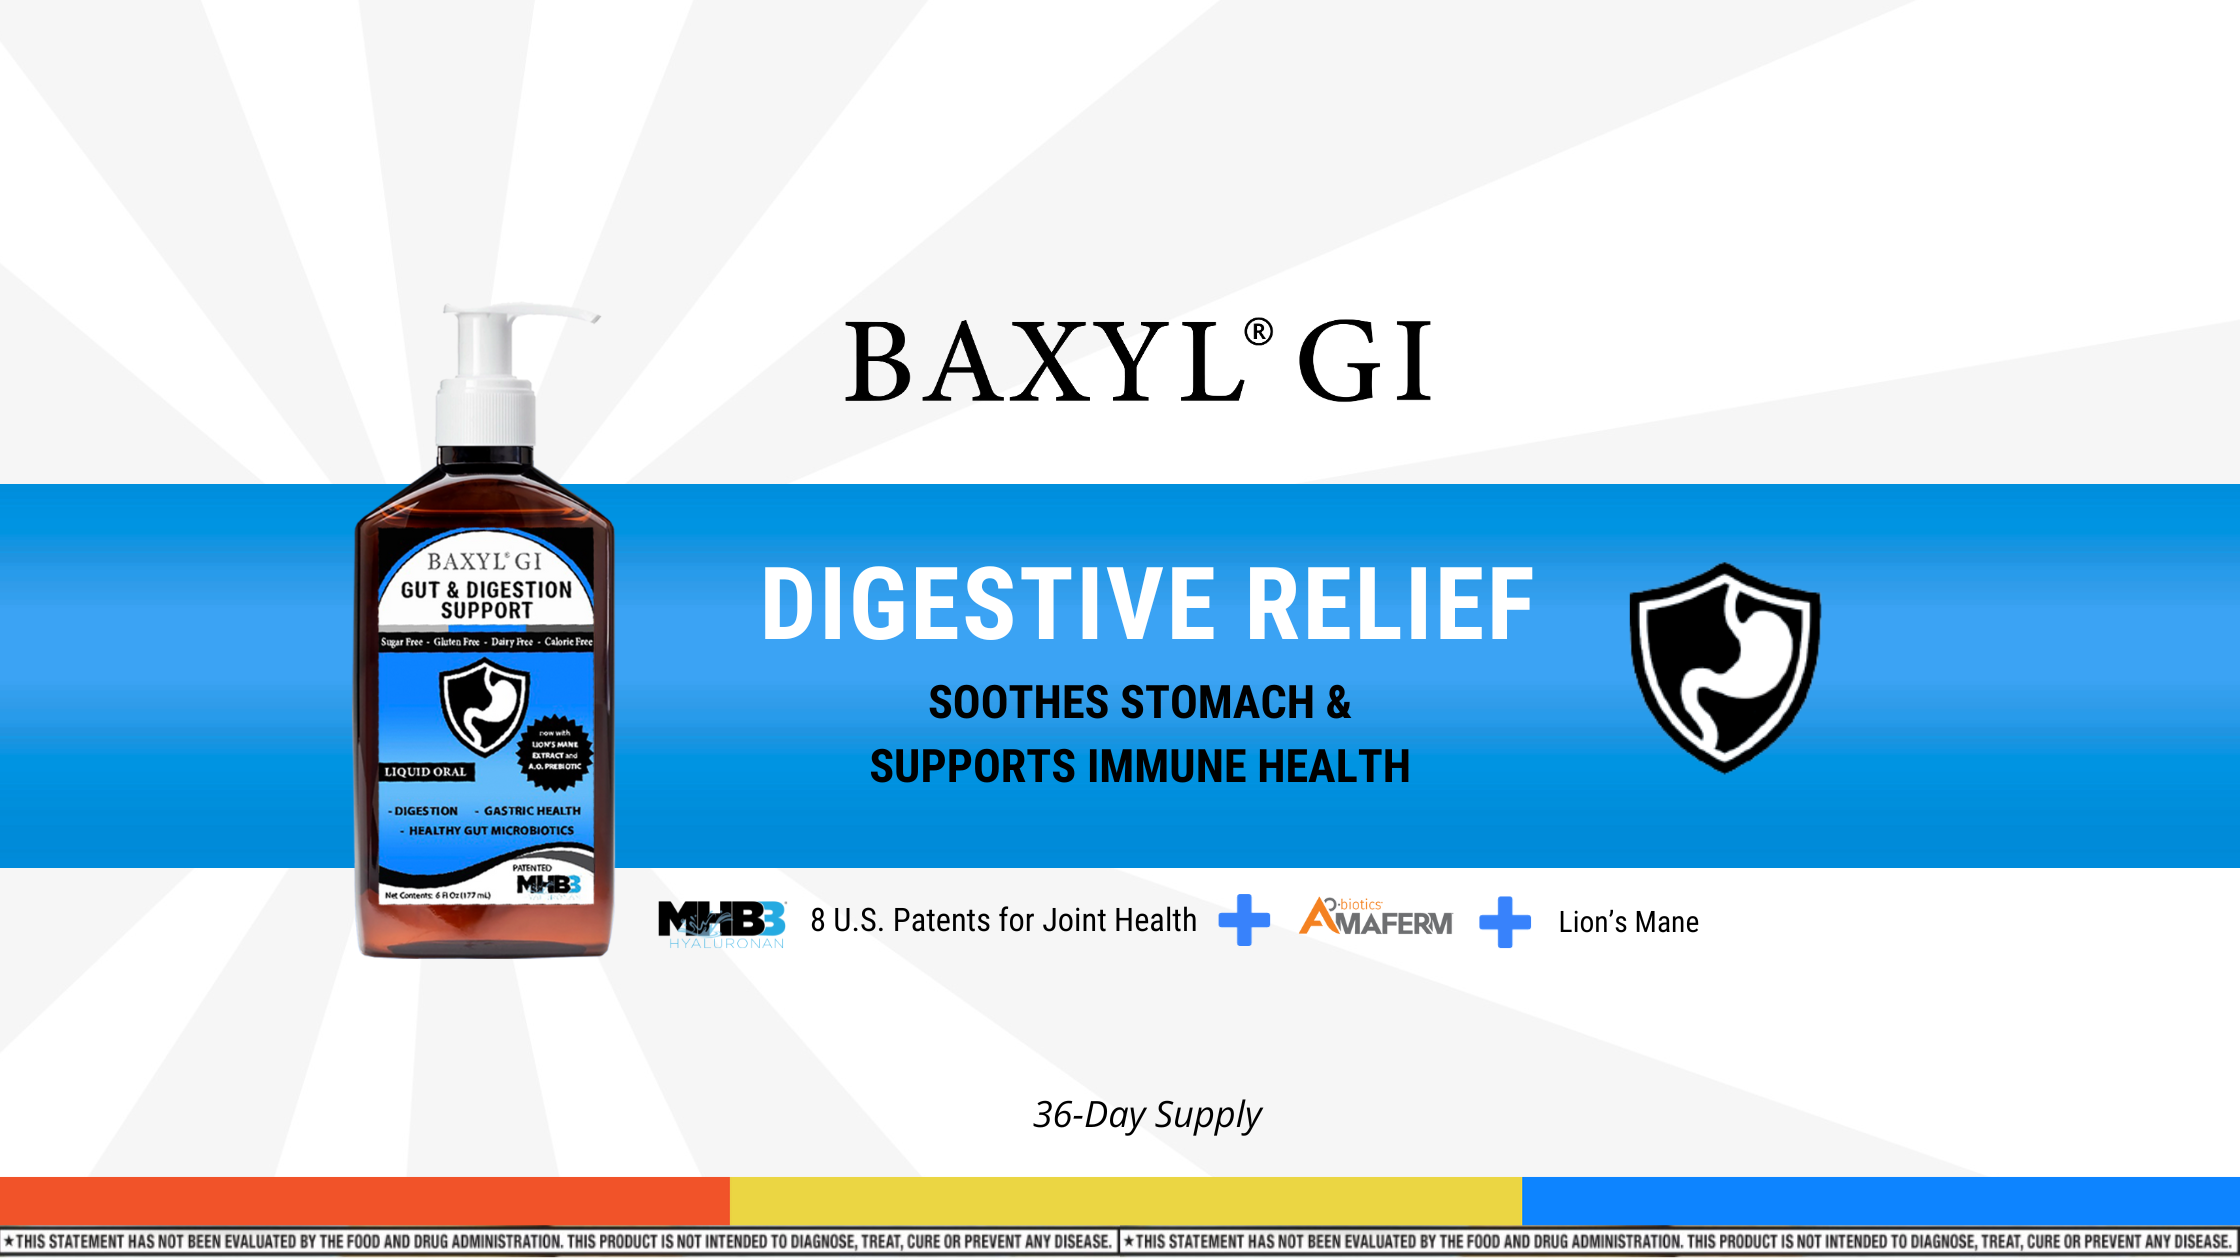 gut and digestion supplement on blue background that says digestive relief that soothes stomach and supports immune health